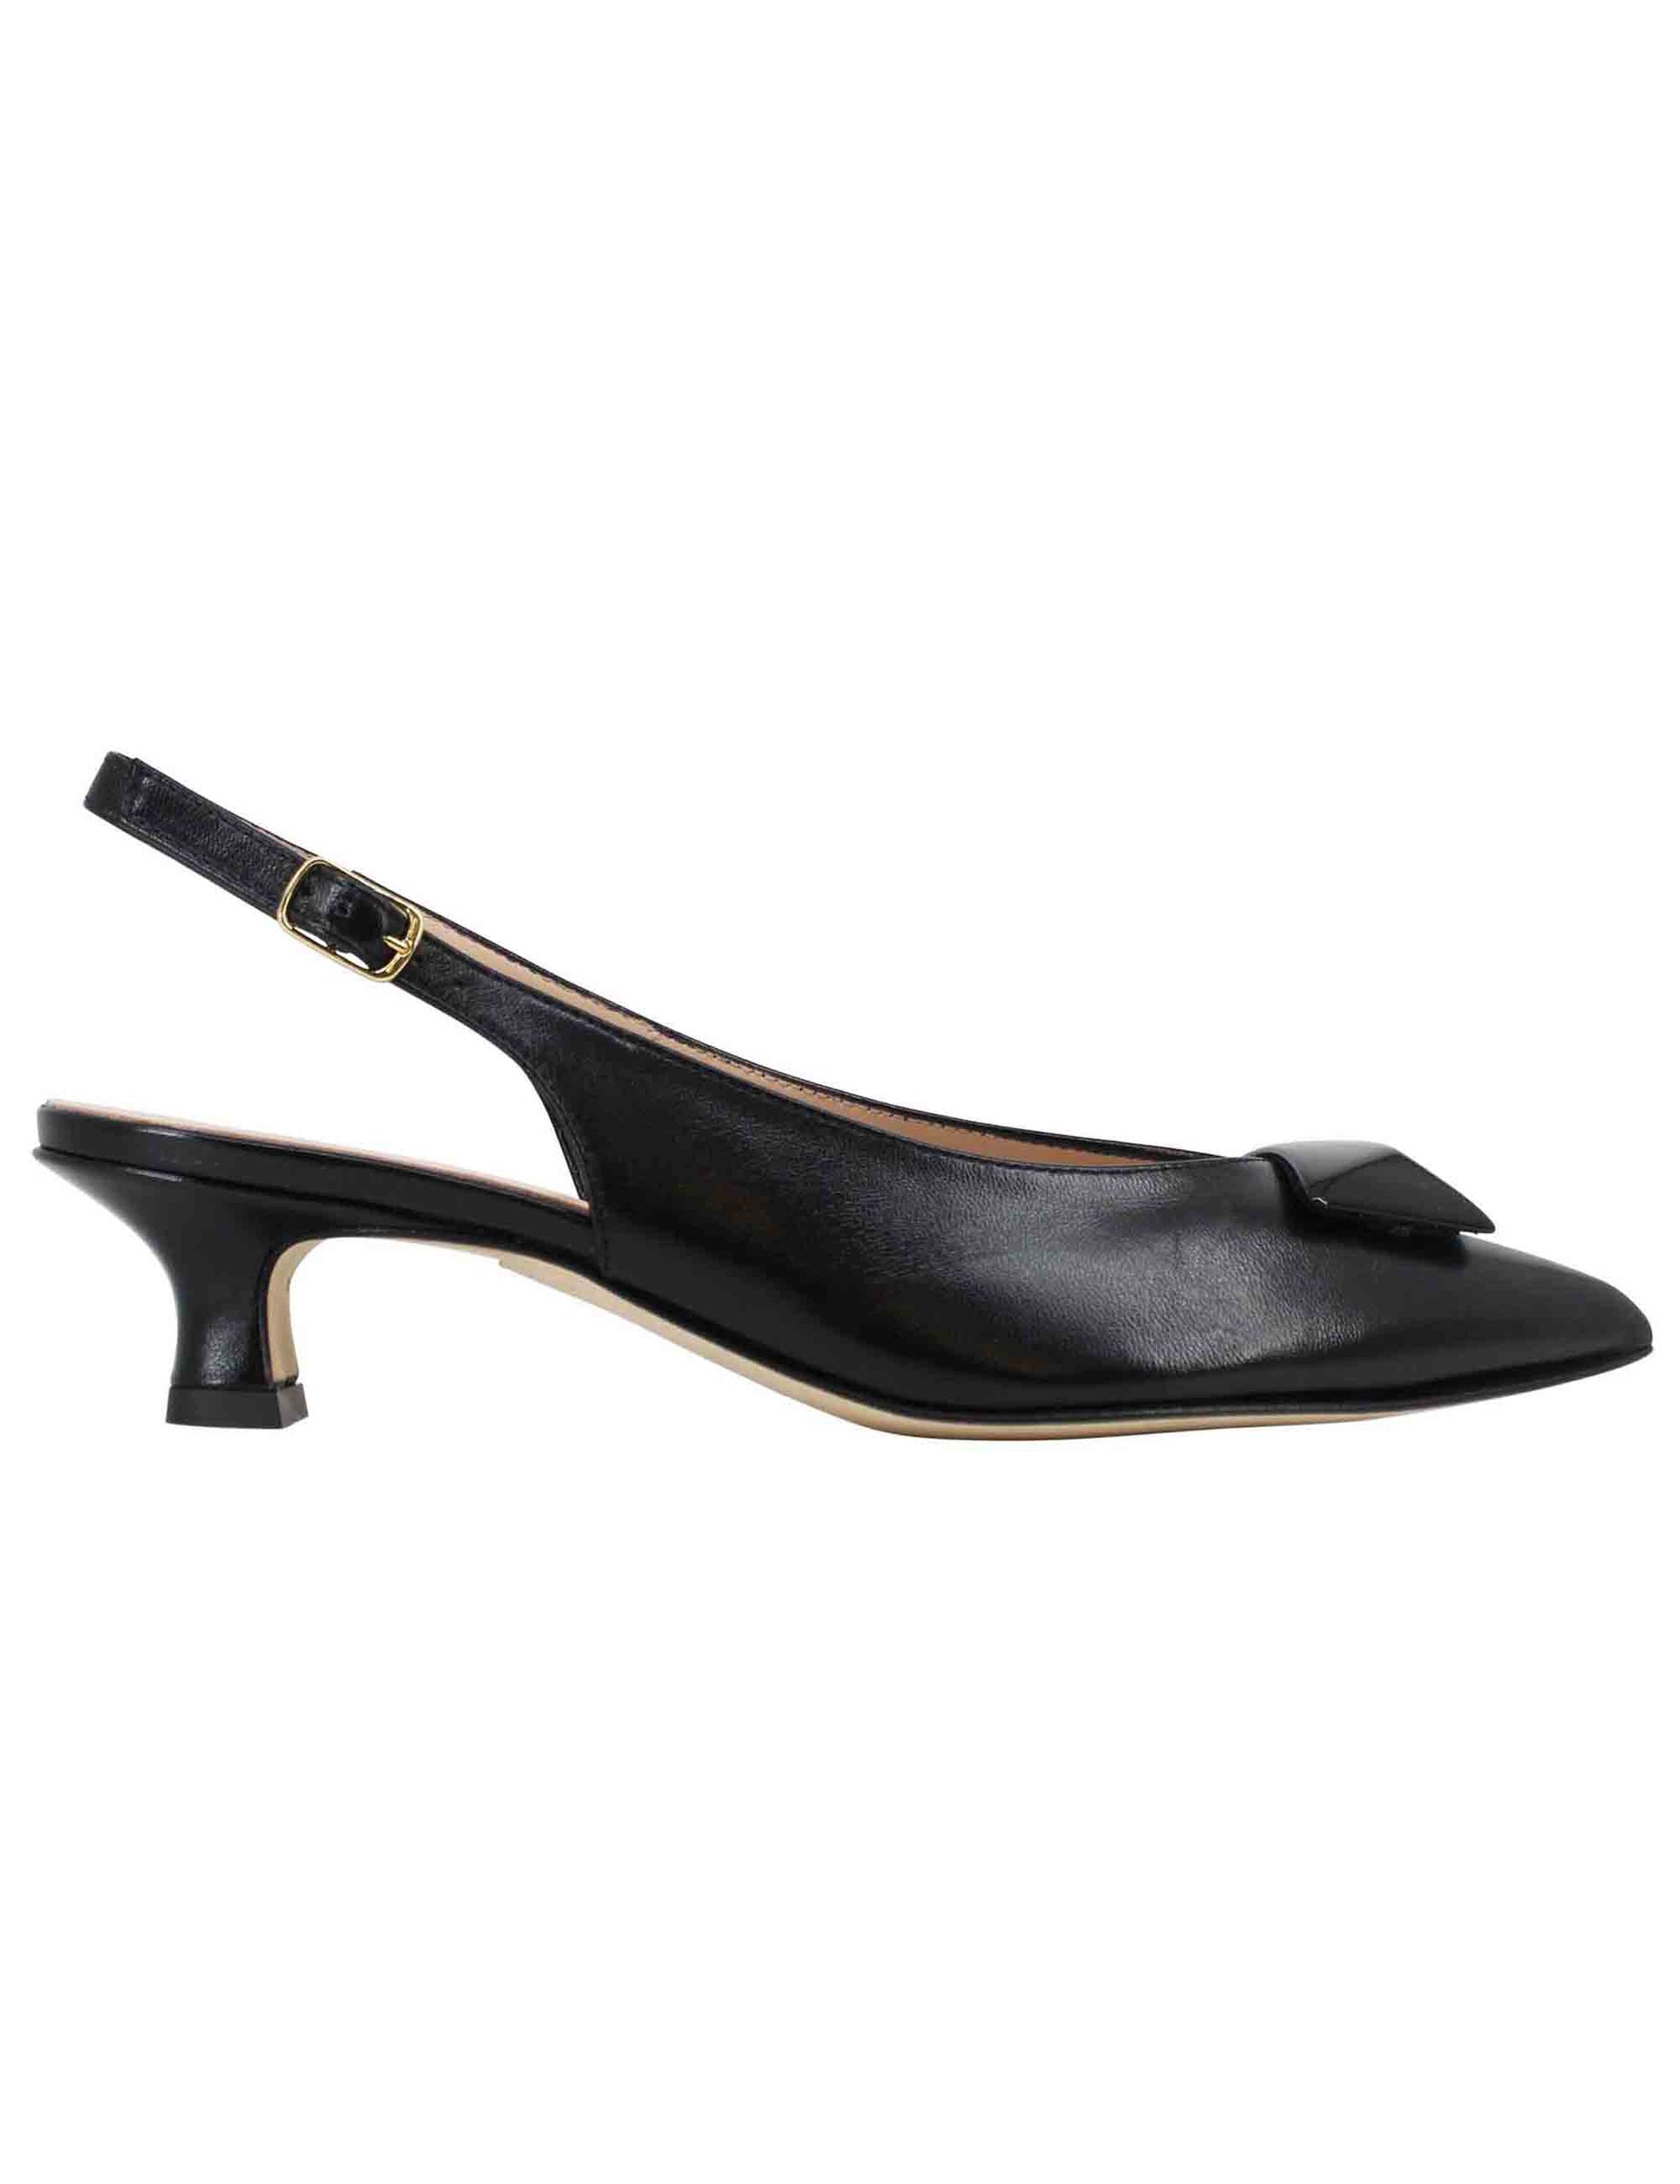 Women's slingback pumps in black leather with low heel and matching accessory